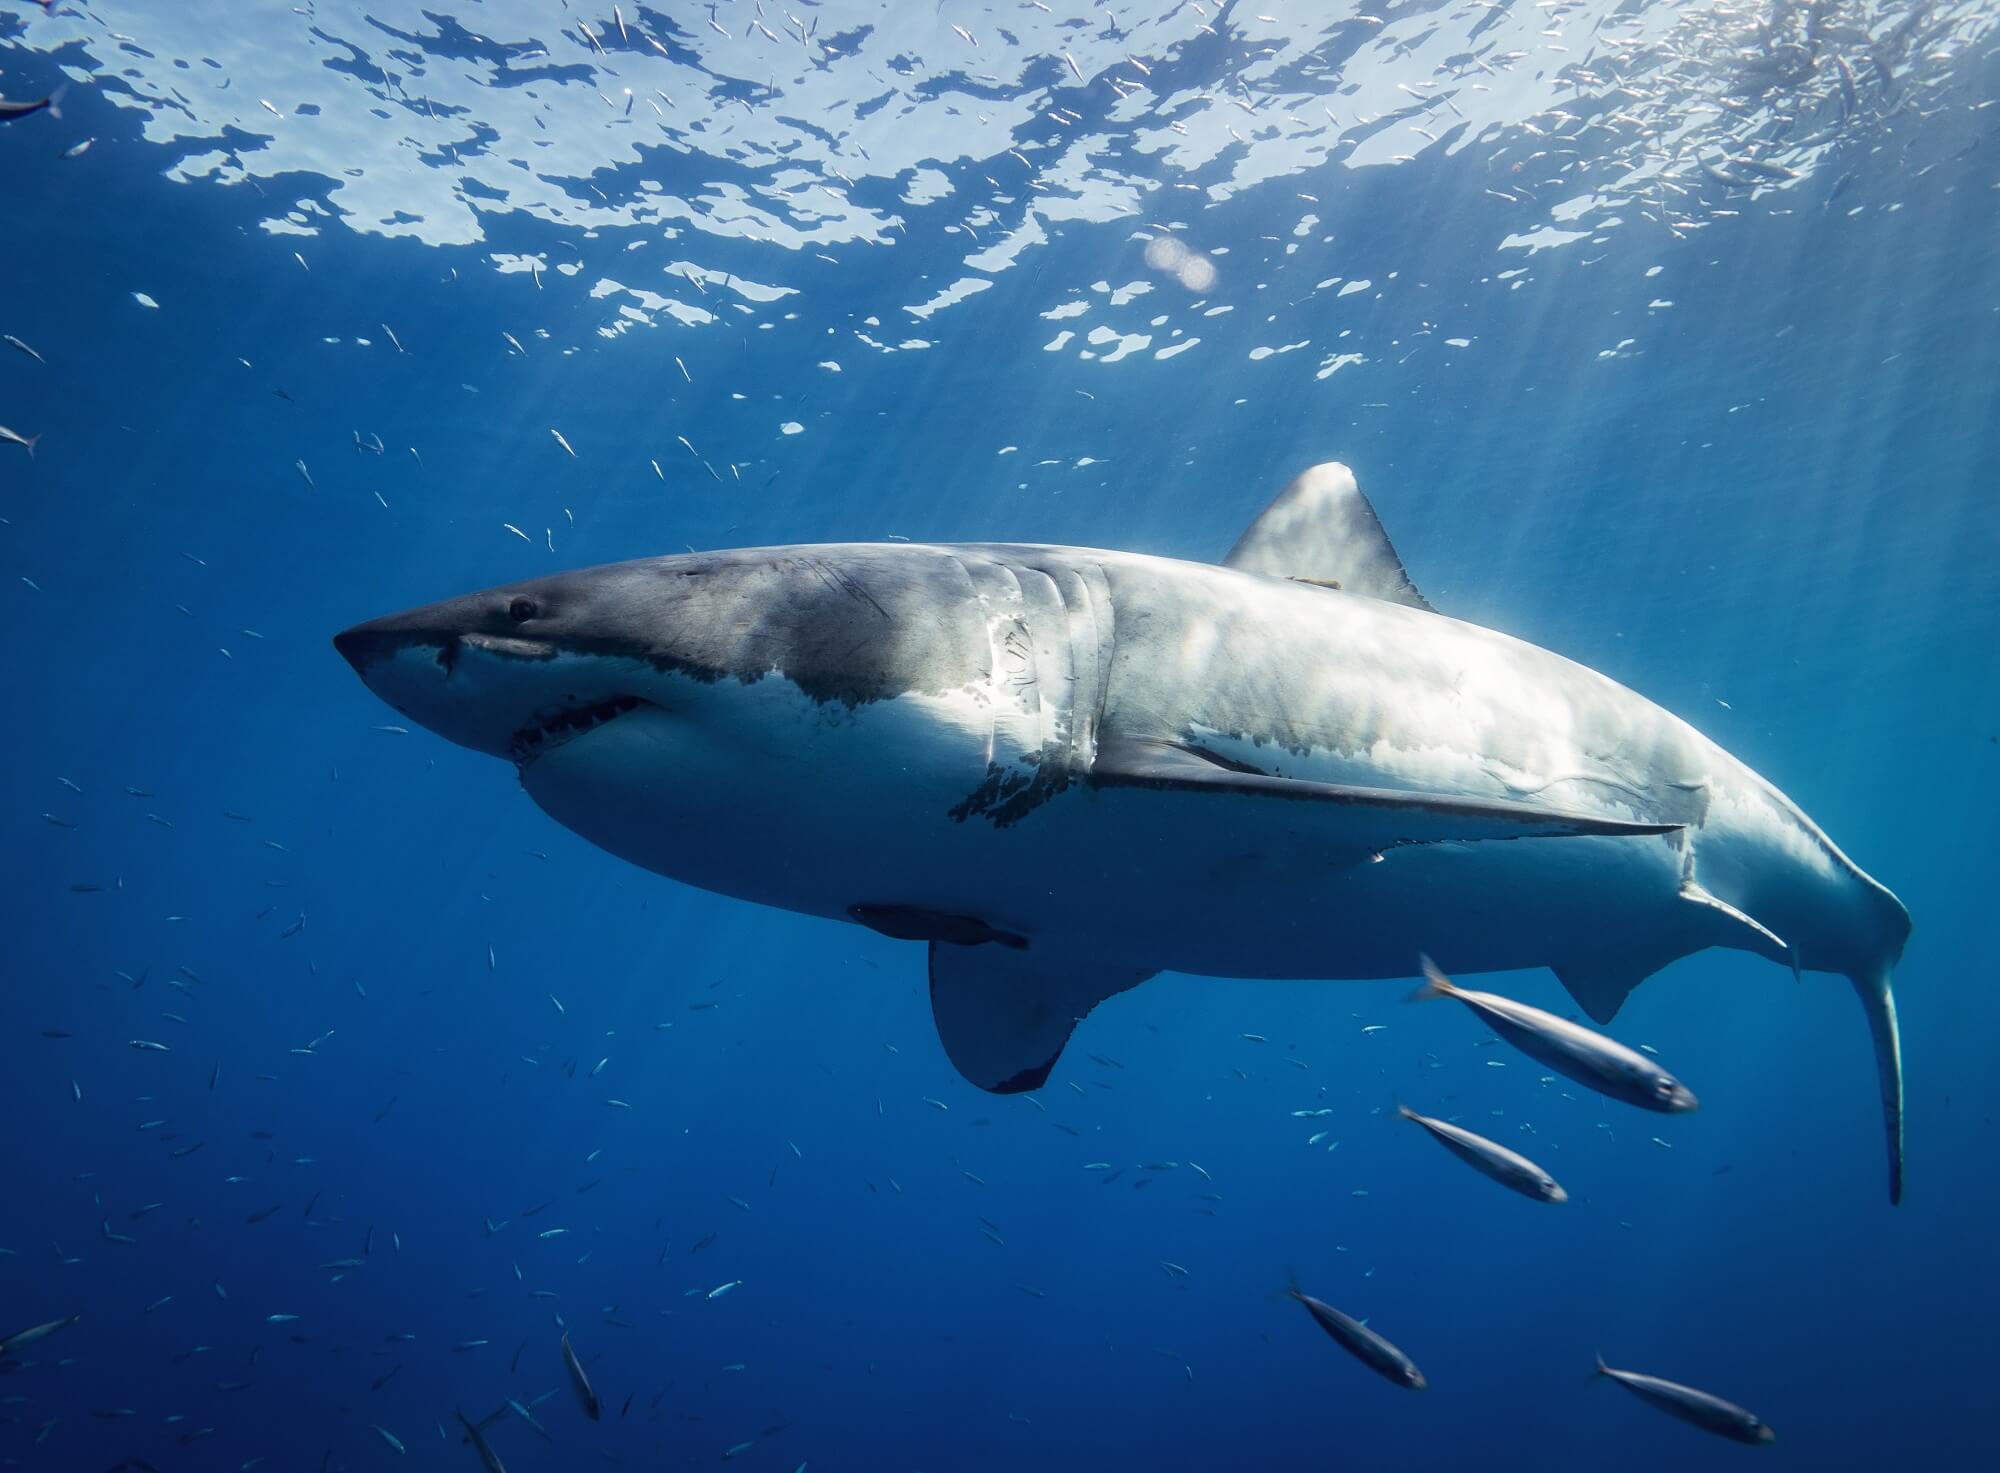 Great White Shark cage diving ban